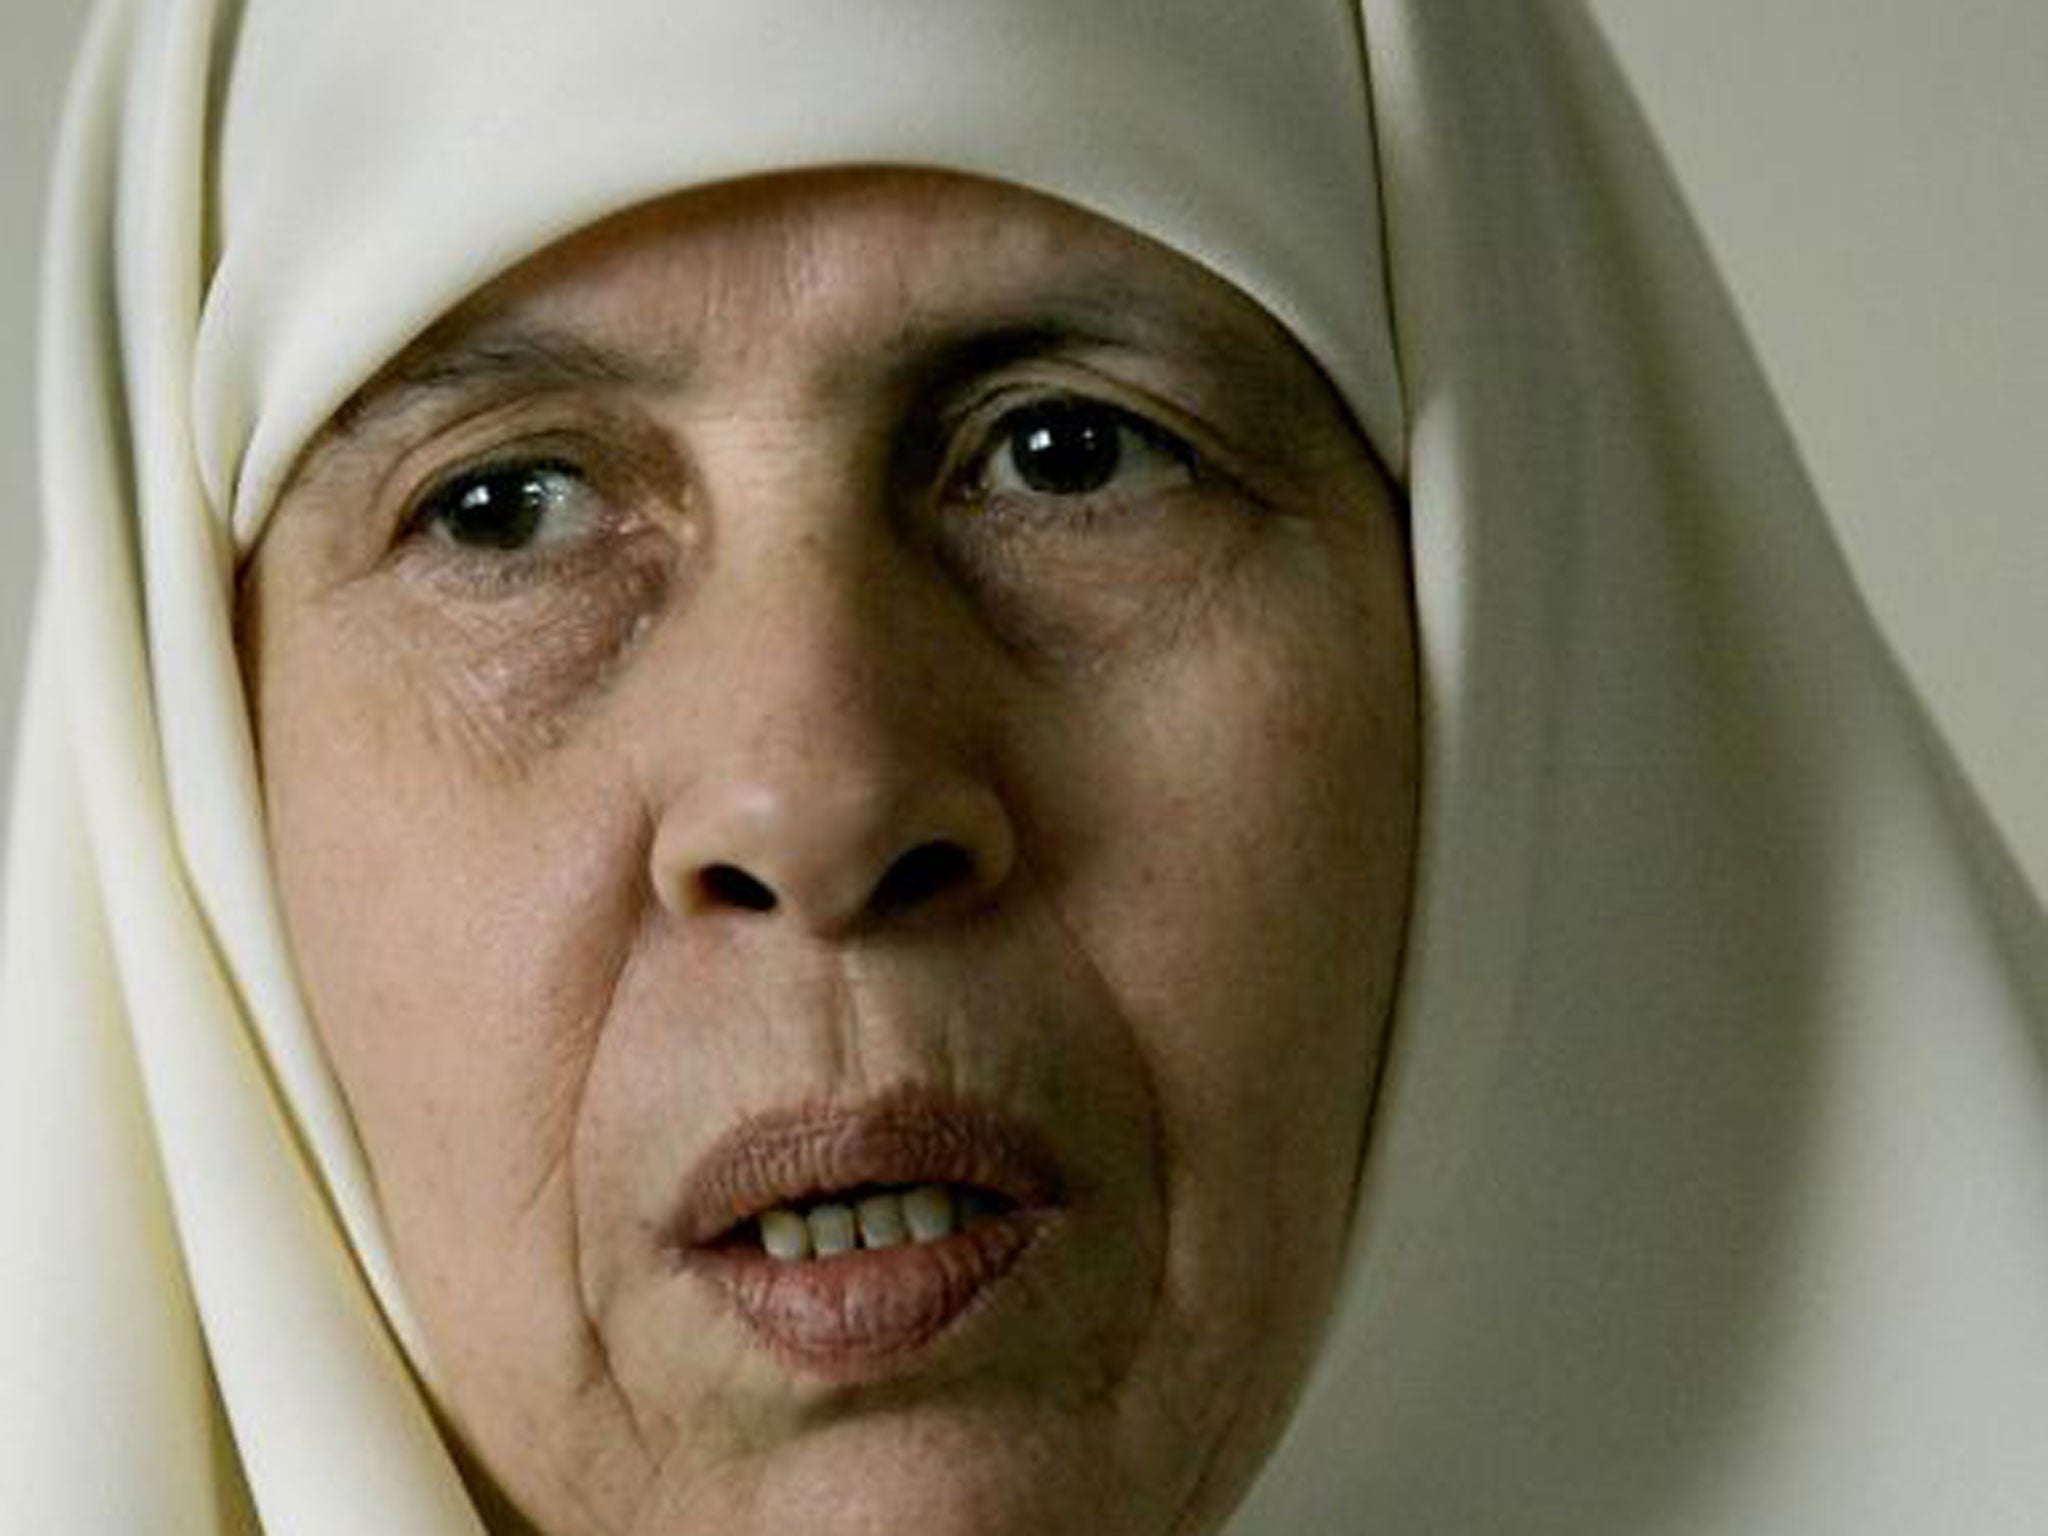 Marian Farhat, who died on 17 March aged 64, was a Palestinian lawmaker known as “the mother of martyrs”